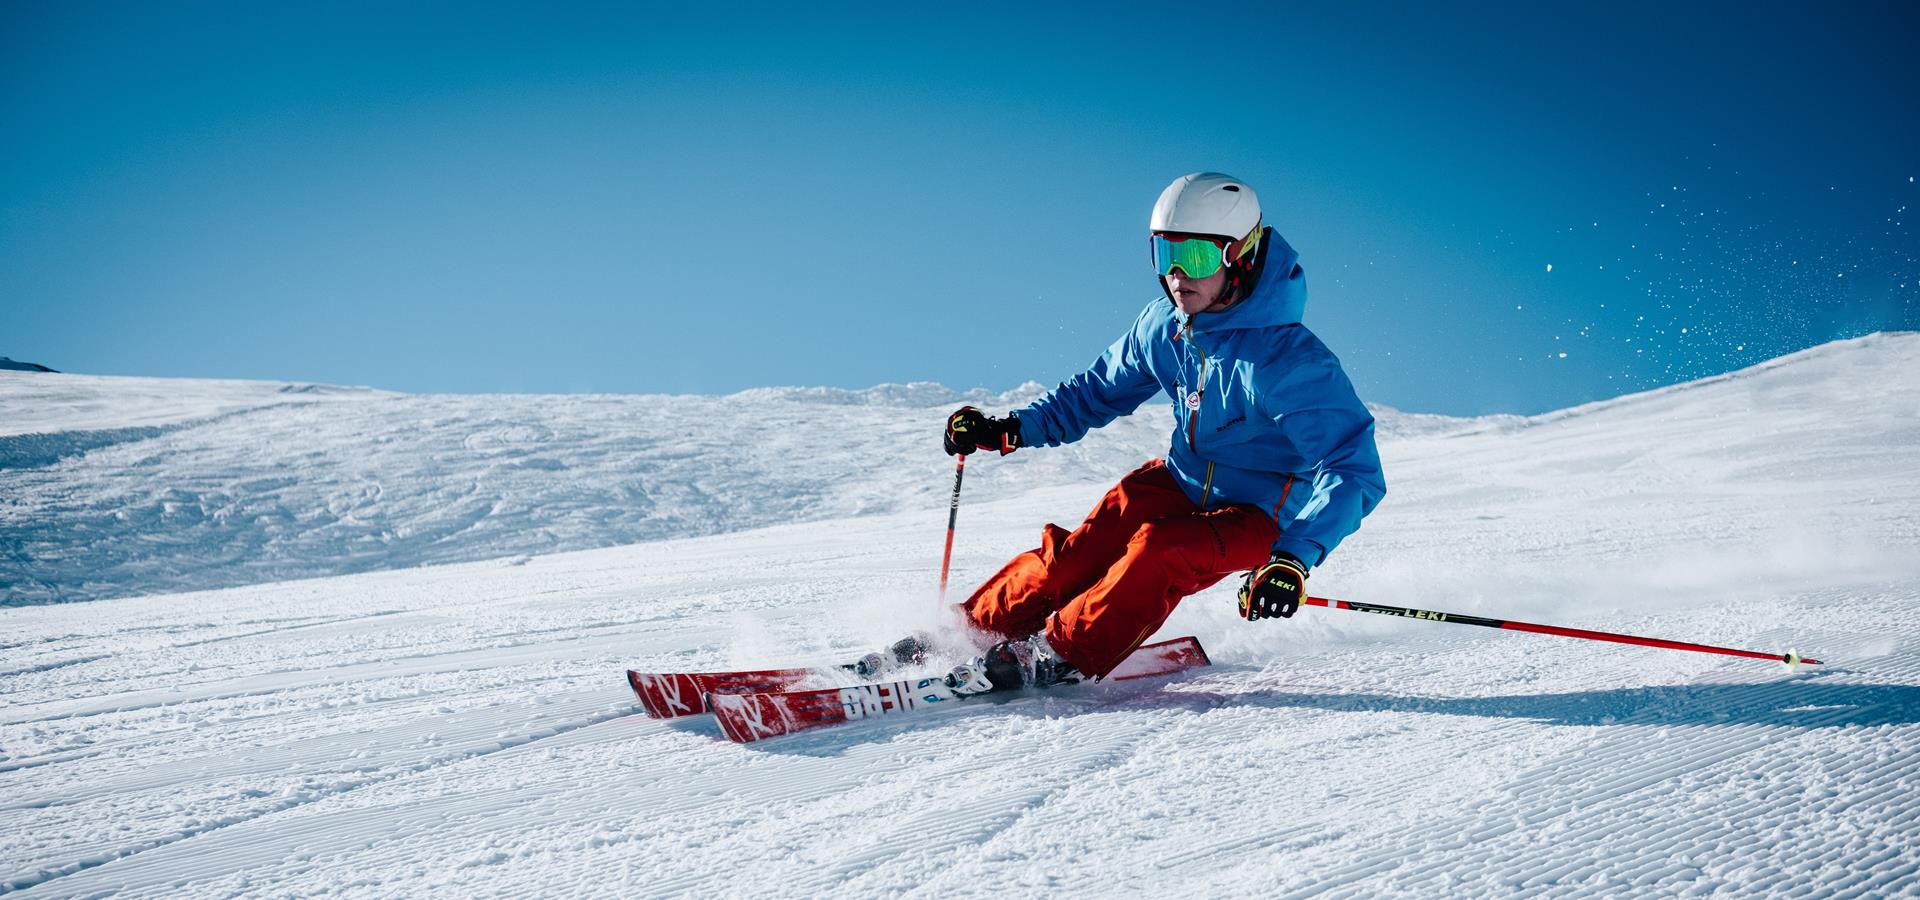 Ski Holidays 2020 from Ireland Cheap All Inclusive Skiing 